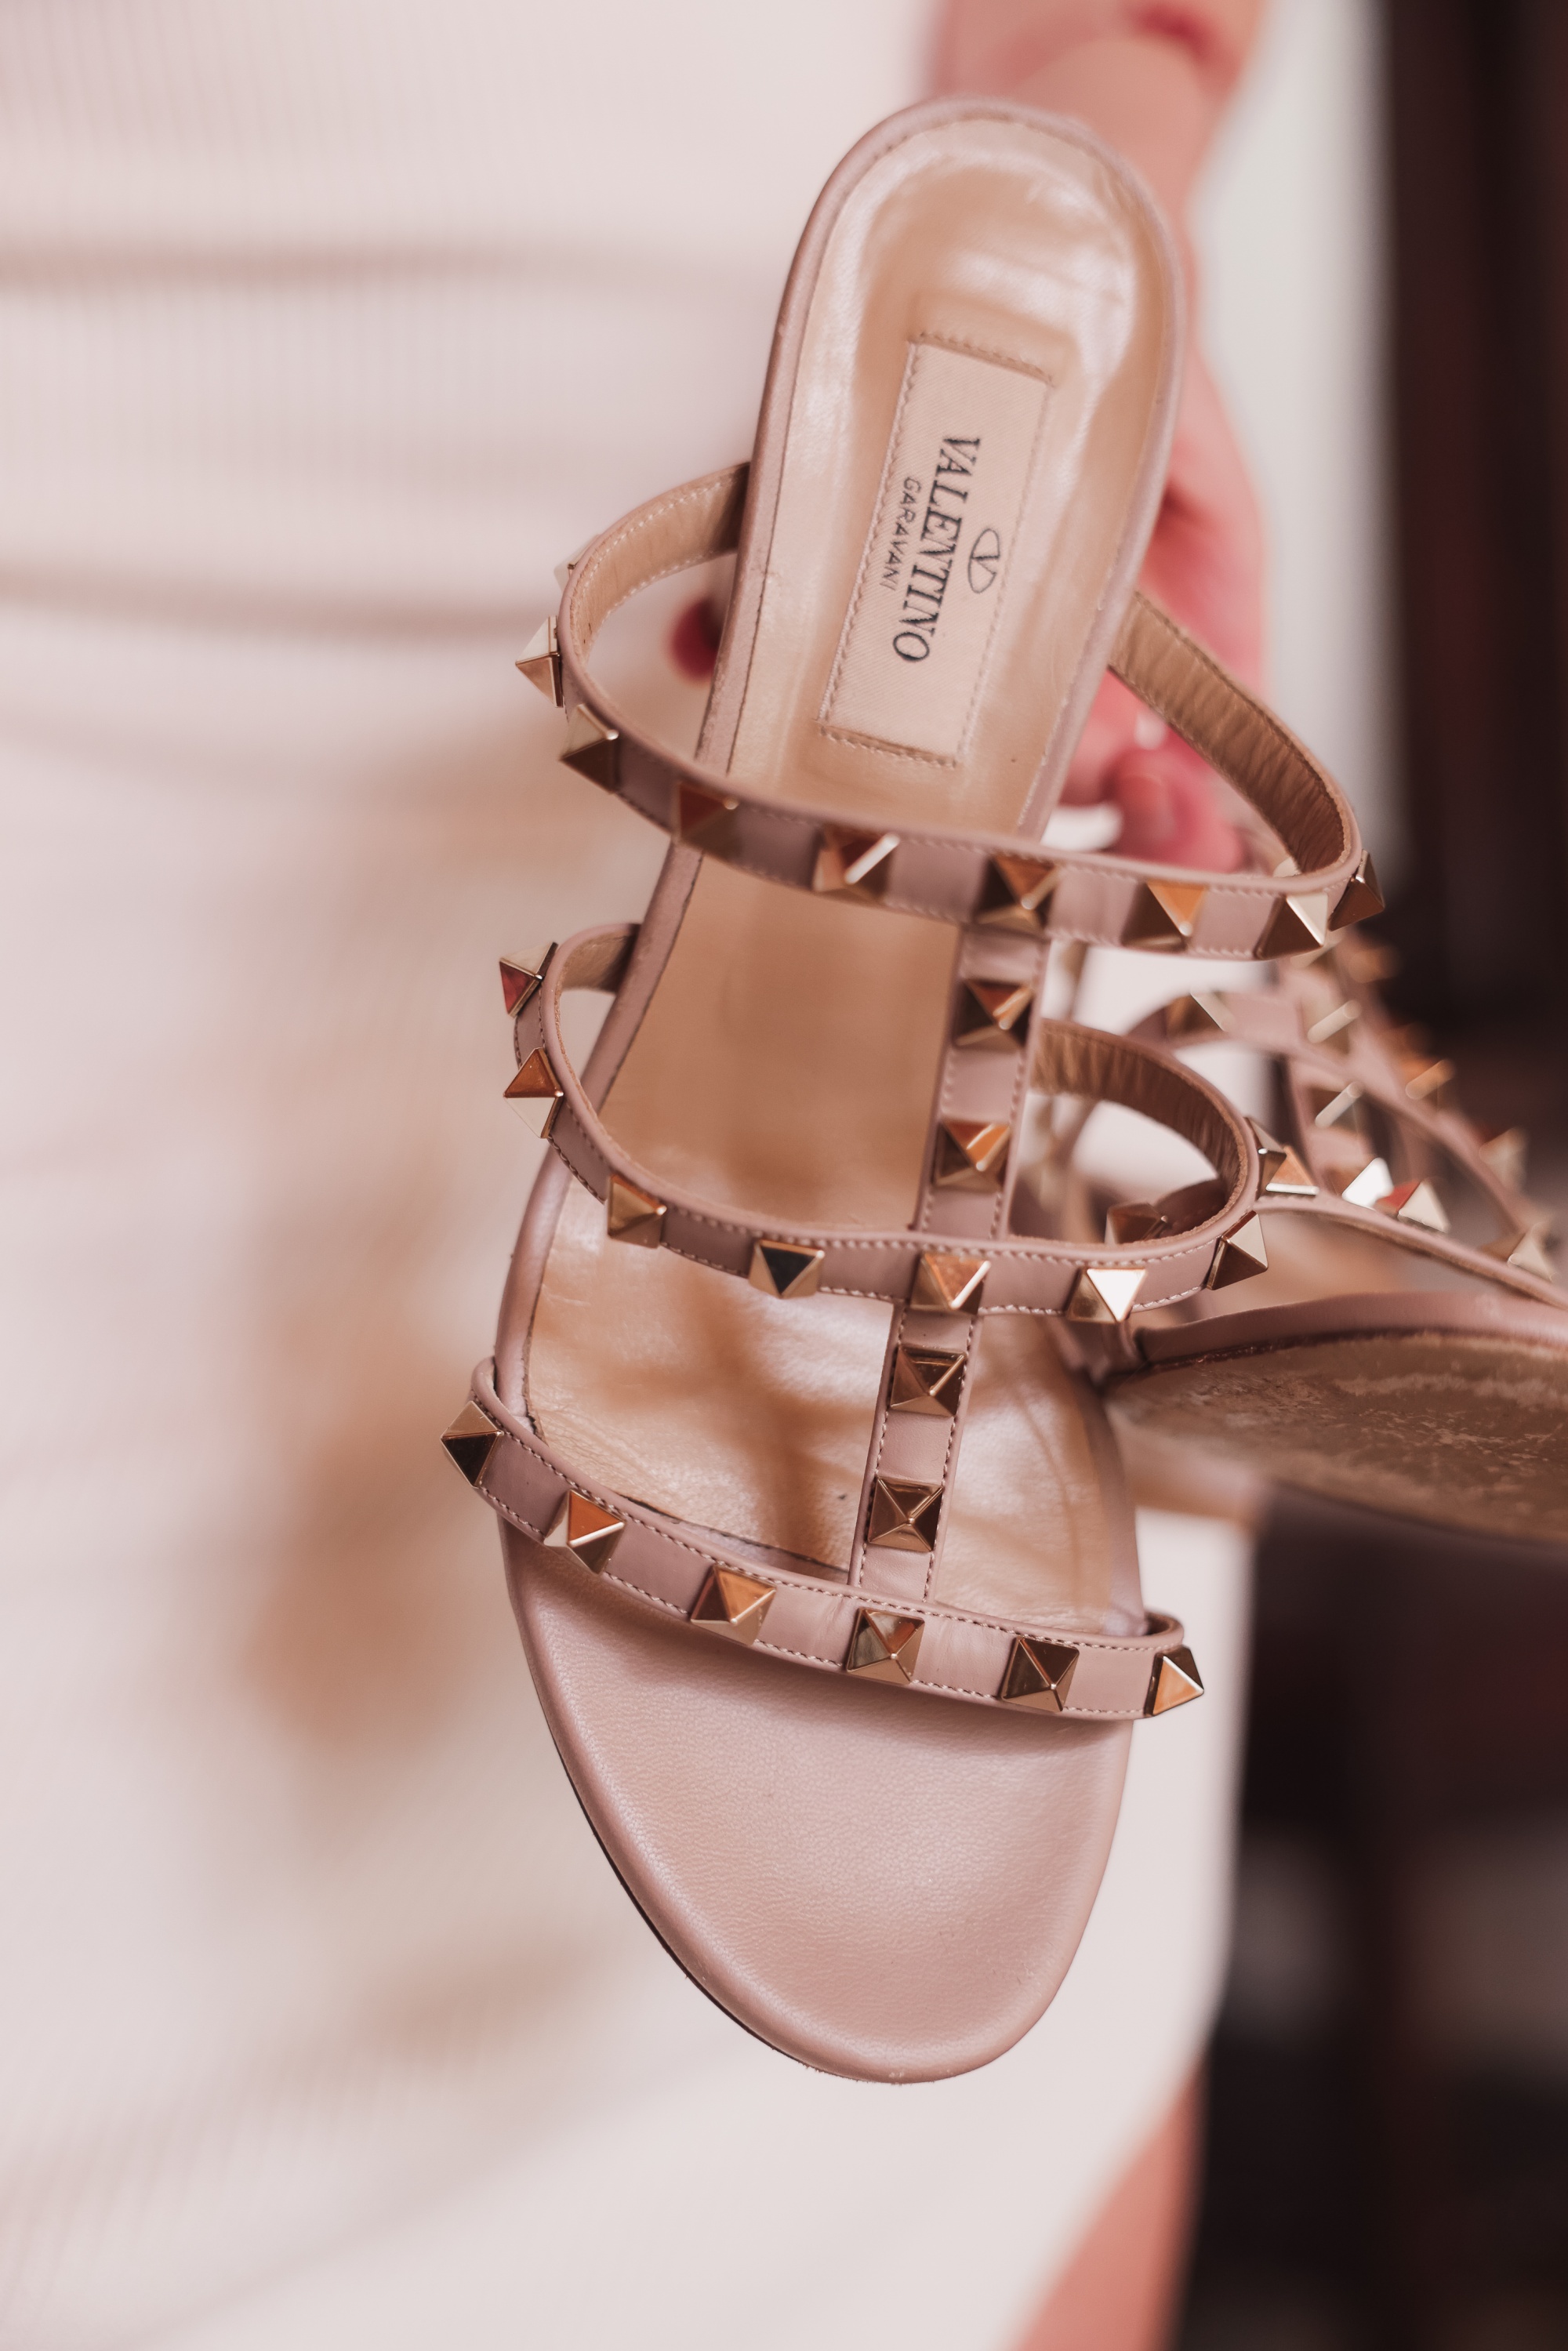 Valentino Rockstud sandals in beige paired with white knit tank dress